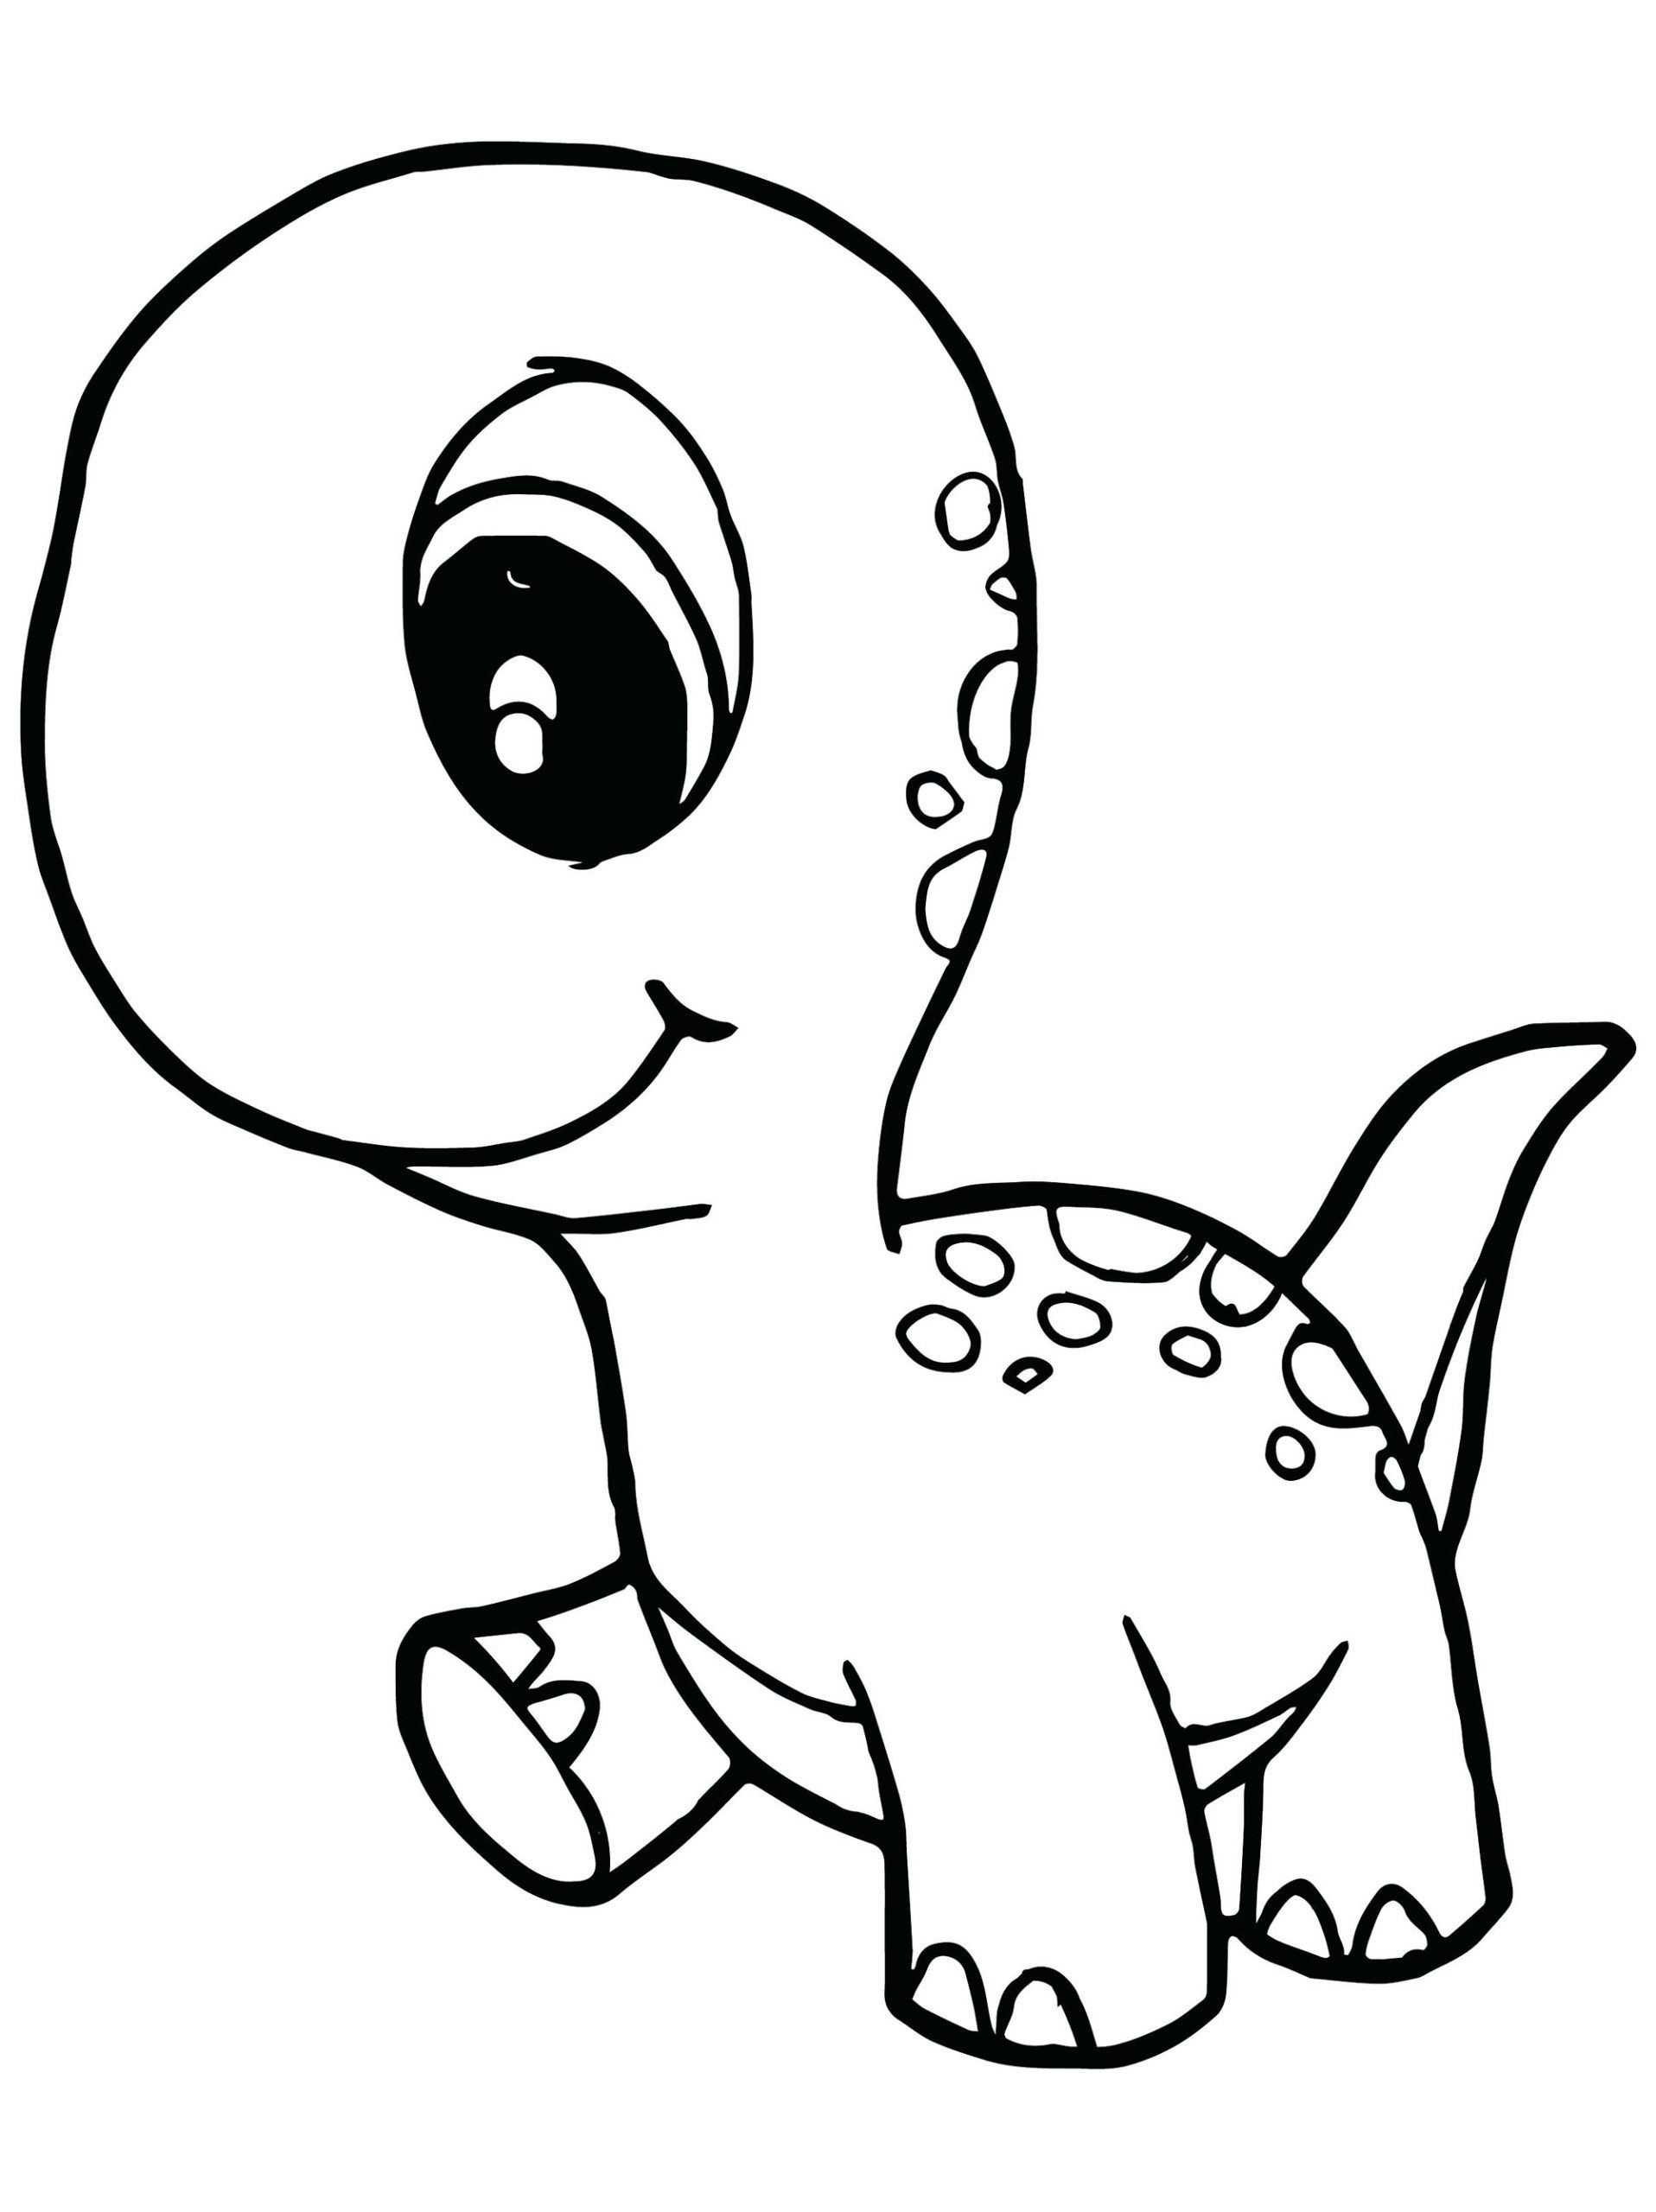 Dinosaur Coloring Pages To Print Enjoyable And Engaging Designs